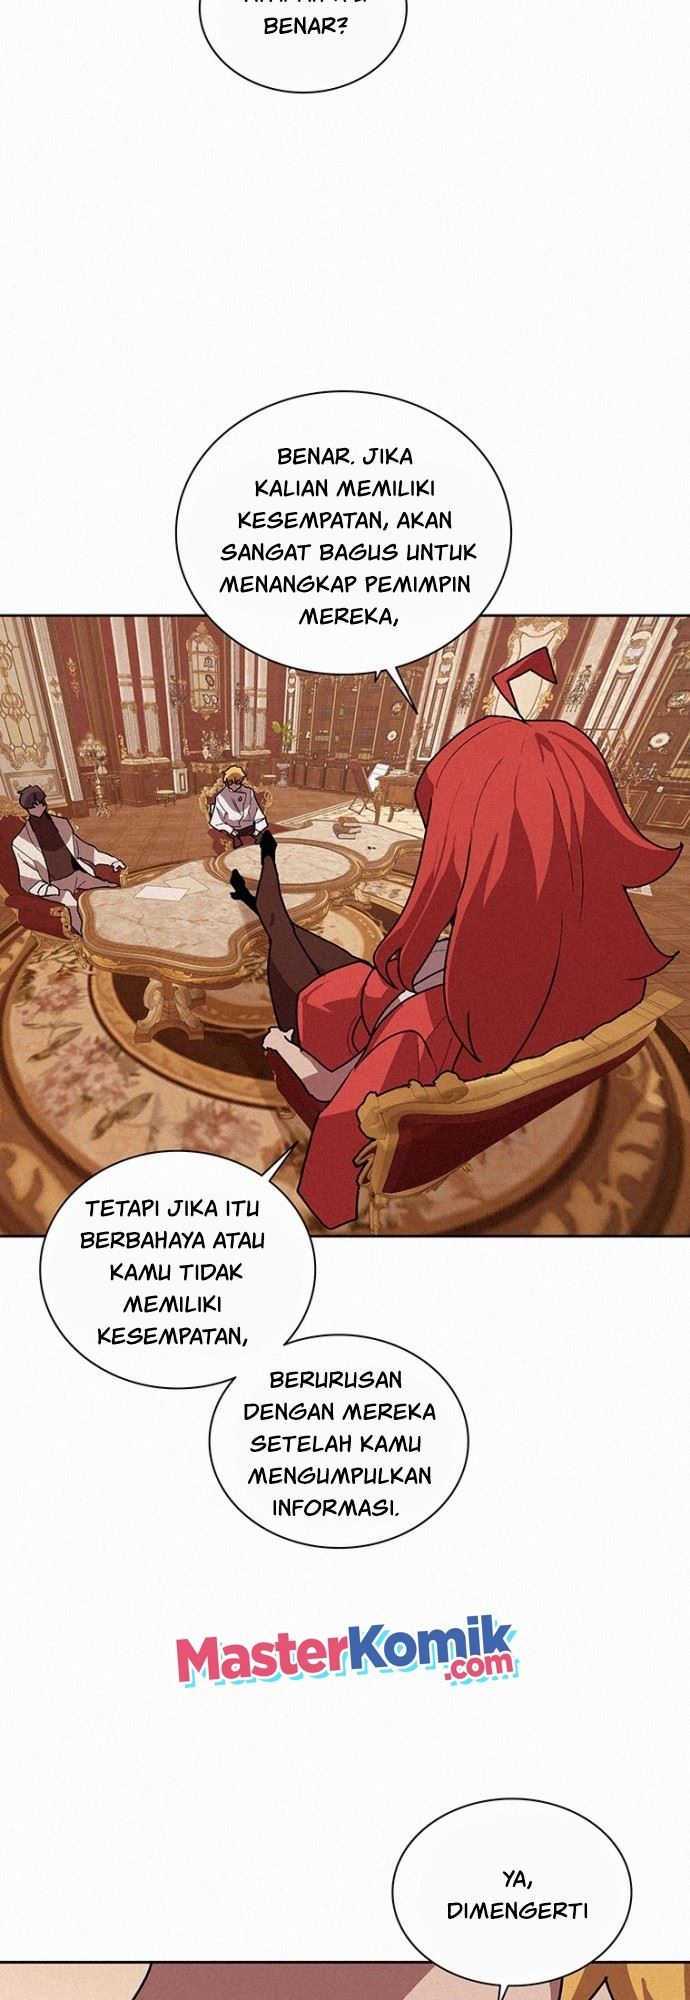 Book Eater Chapter 49